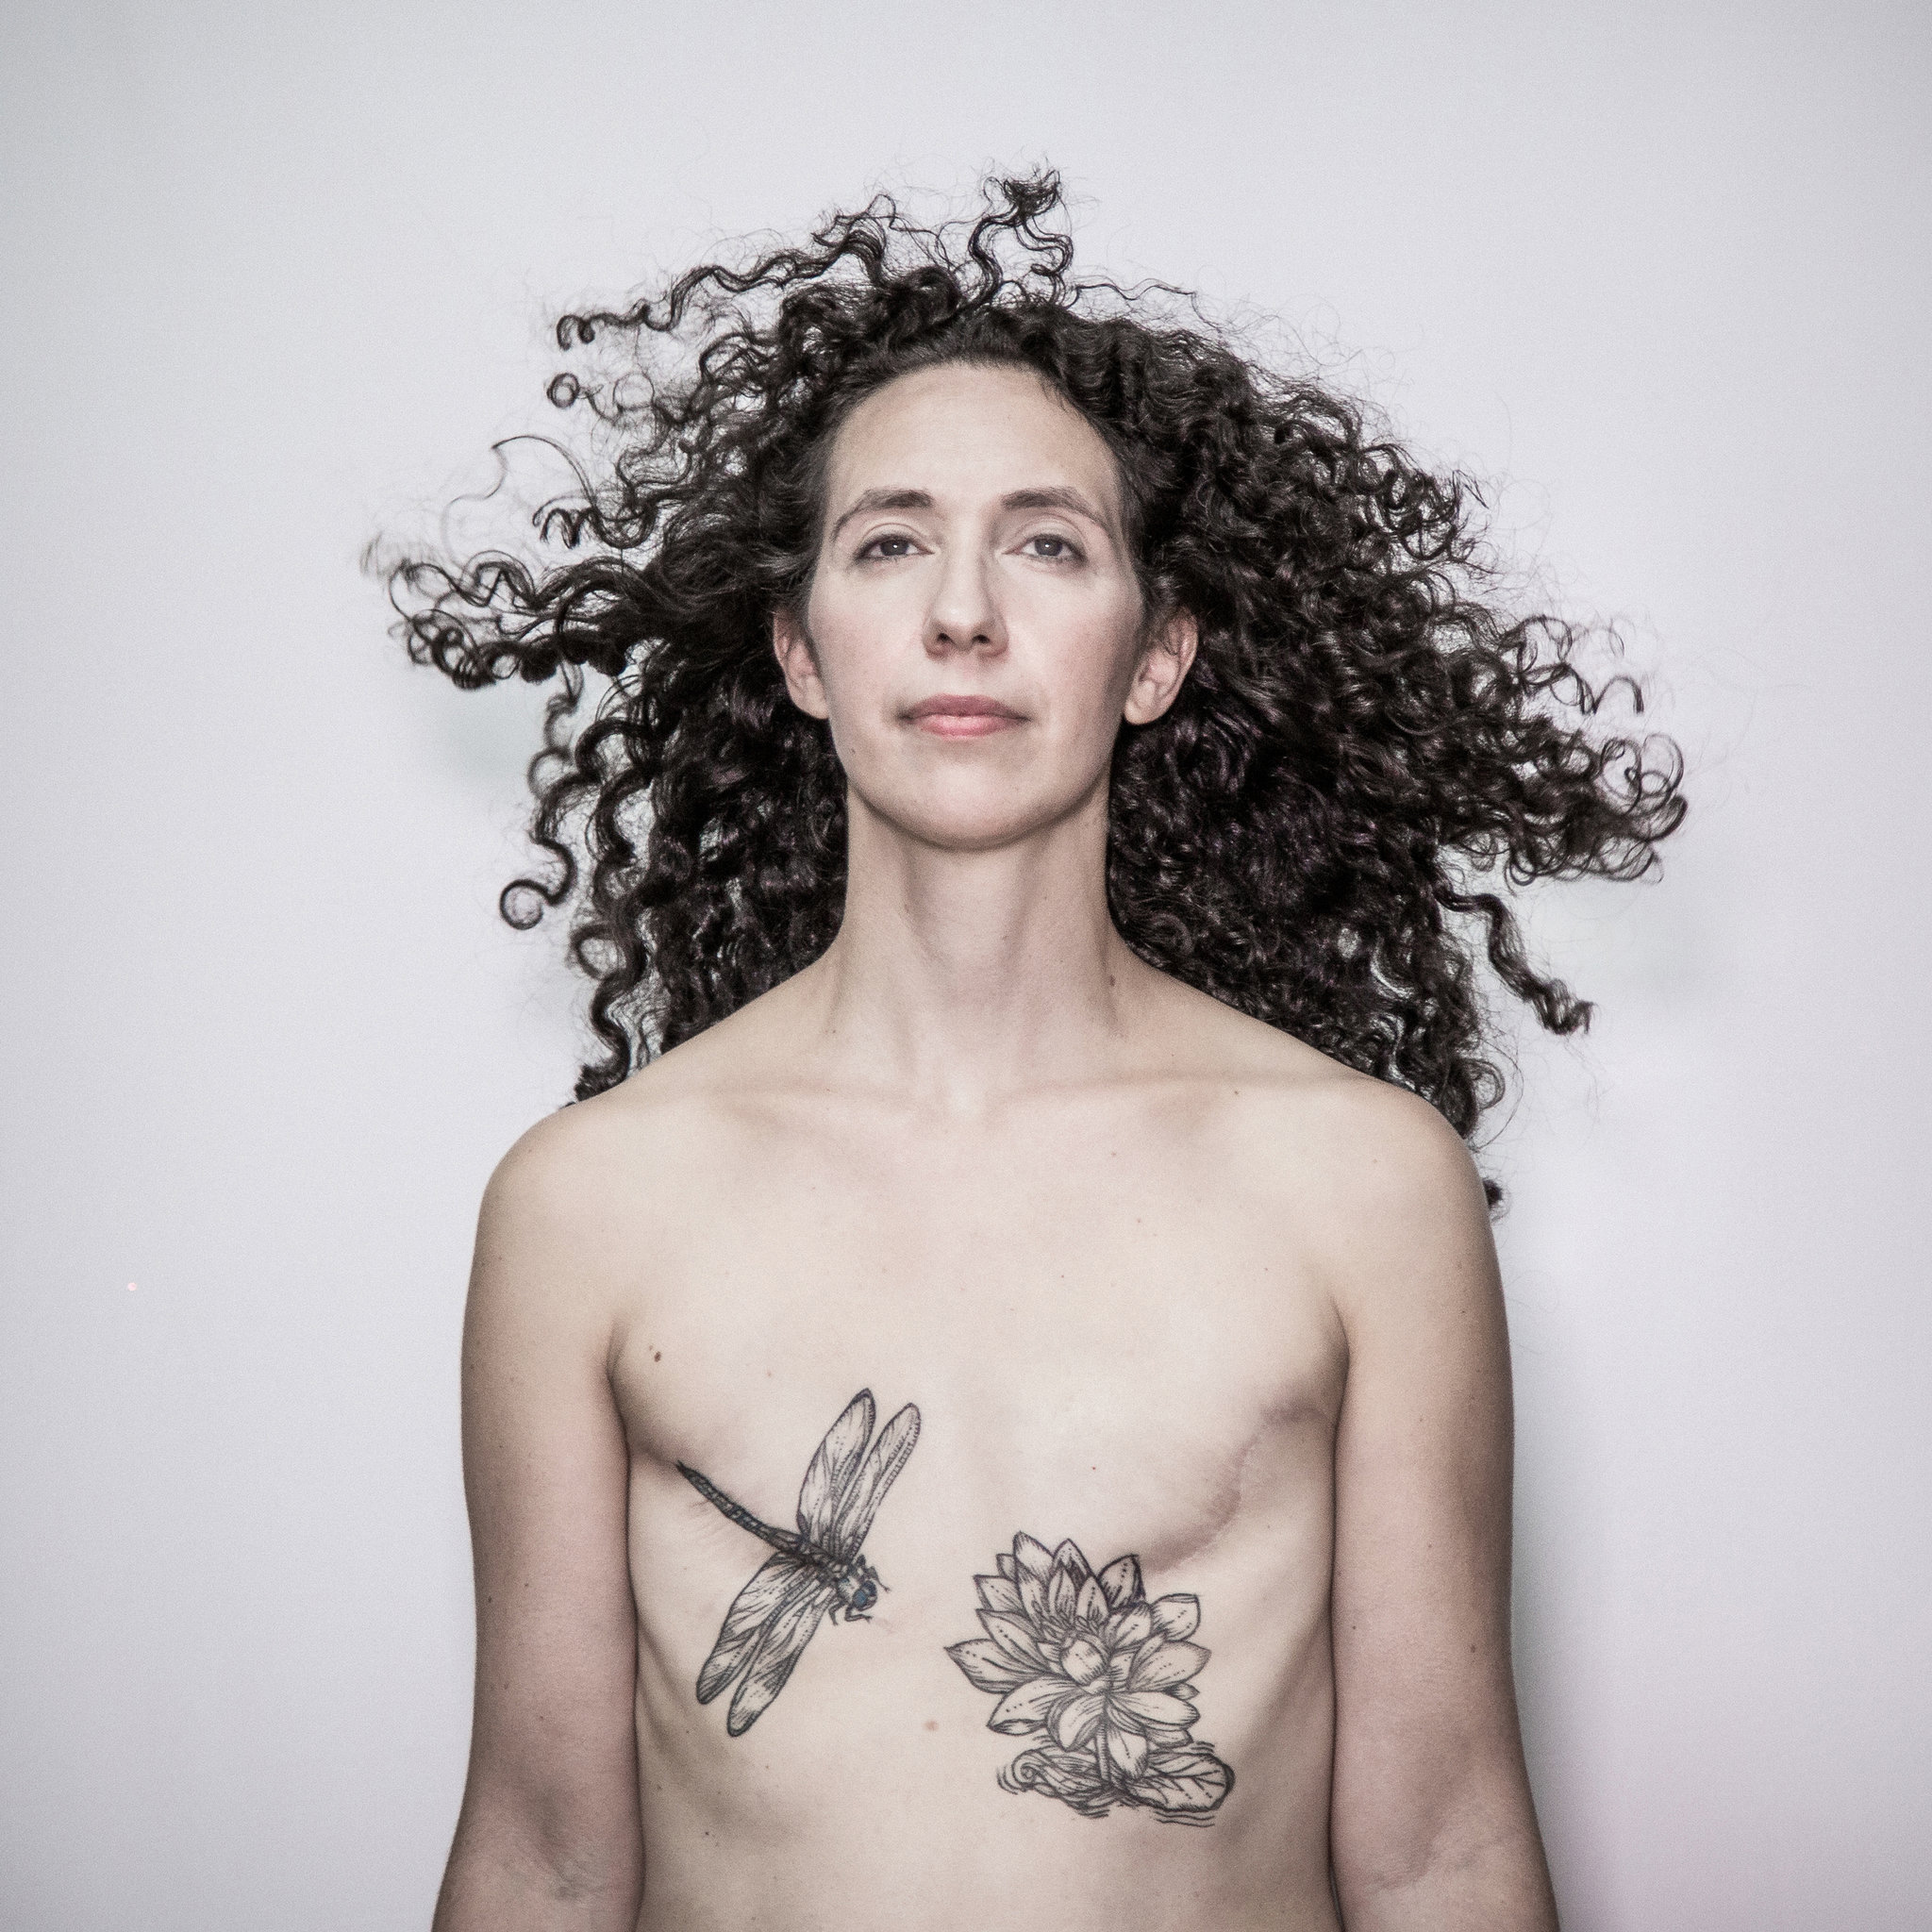 Photograph by Béatrice de Géa for The New York Times. Caption: “It’s a tremendous amount to put your body throgh, and it’s not like we’re going to get our breasts back,” said Rebecca Pine, 40, who decided against reconstruction surgery after a mastectomy. 